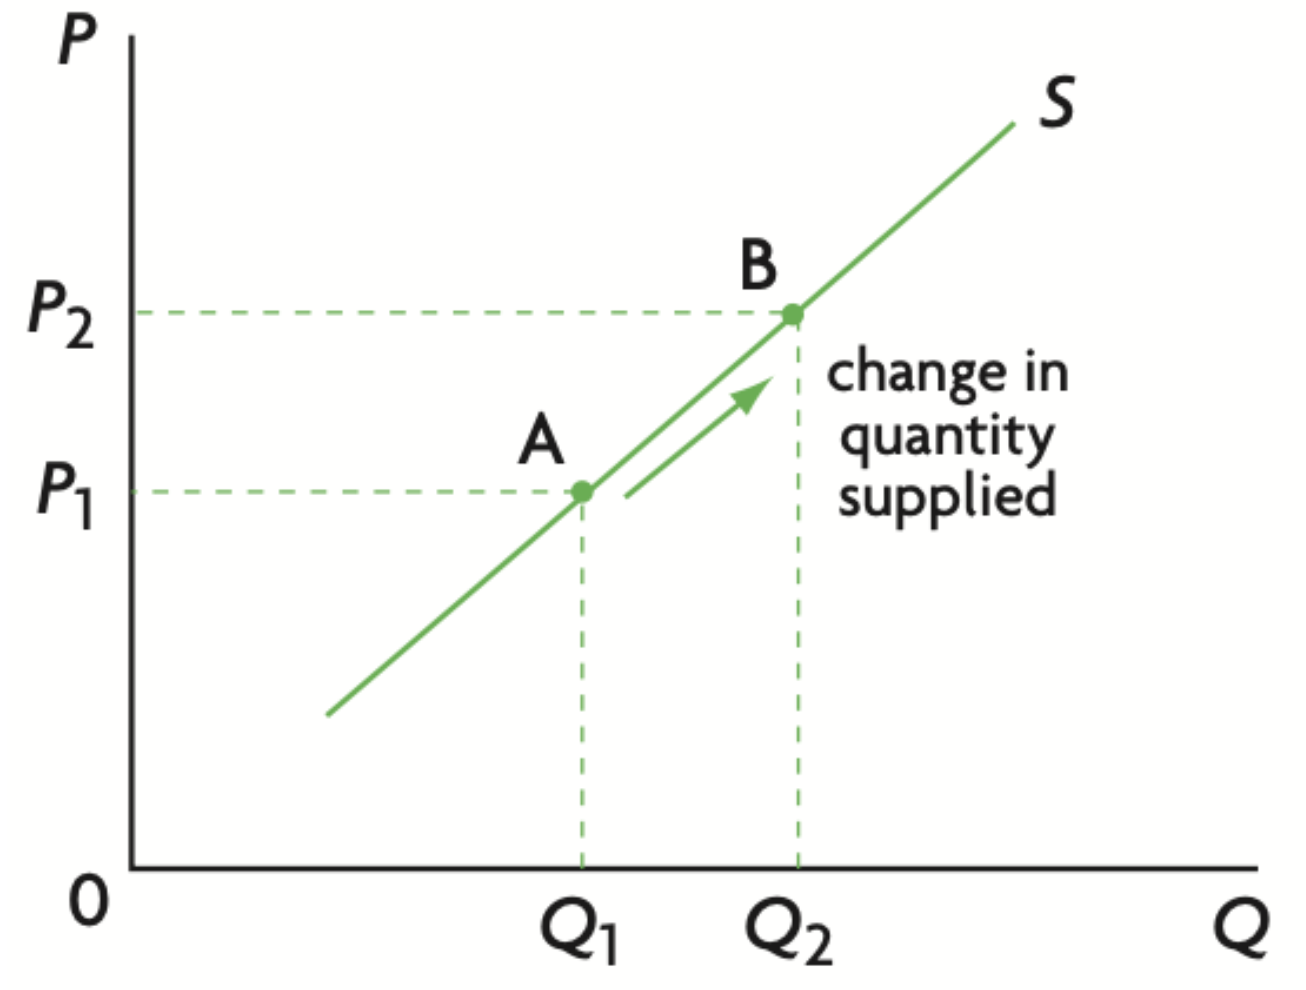 <p><span>Any change in price produces a change in quantity supplied, shown as a movement on the supply curve.</span></p><p><span>Any change in a determinant of supply (other than price) produces a change in supply, represented by a shift of the whole supply curve.</span></p>